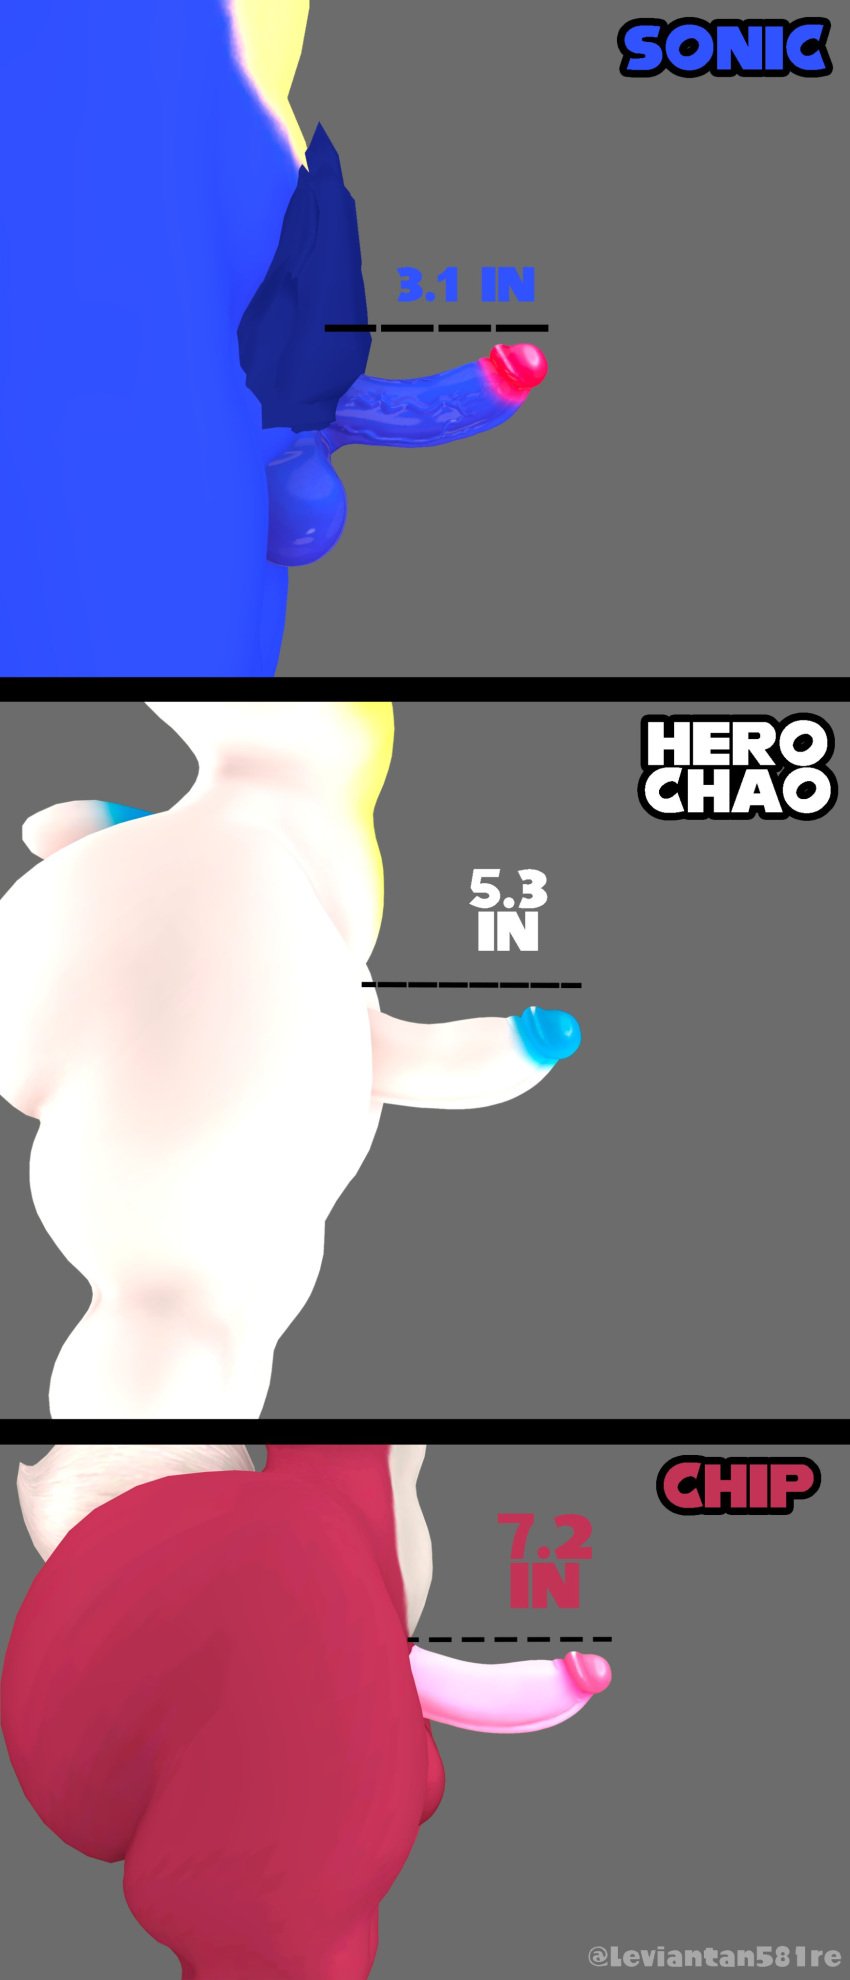 3boys chao_(sonic) chip_(sonic) comparing comparing_penis comparing_sizes hero_chao leviantan581re light_gaia penis_size_difference sonic_(series) sonic_the_hedgehog sonic_the_hedgehog_(series)